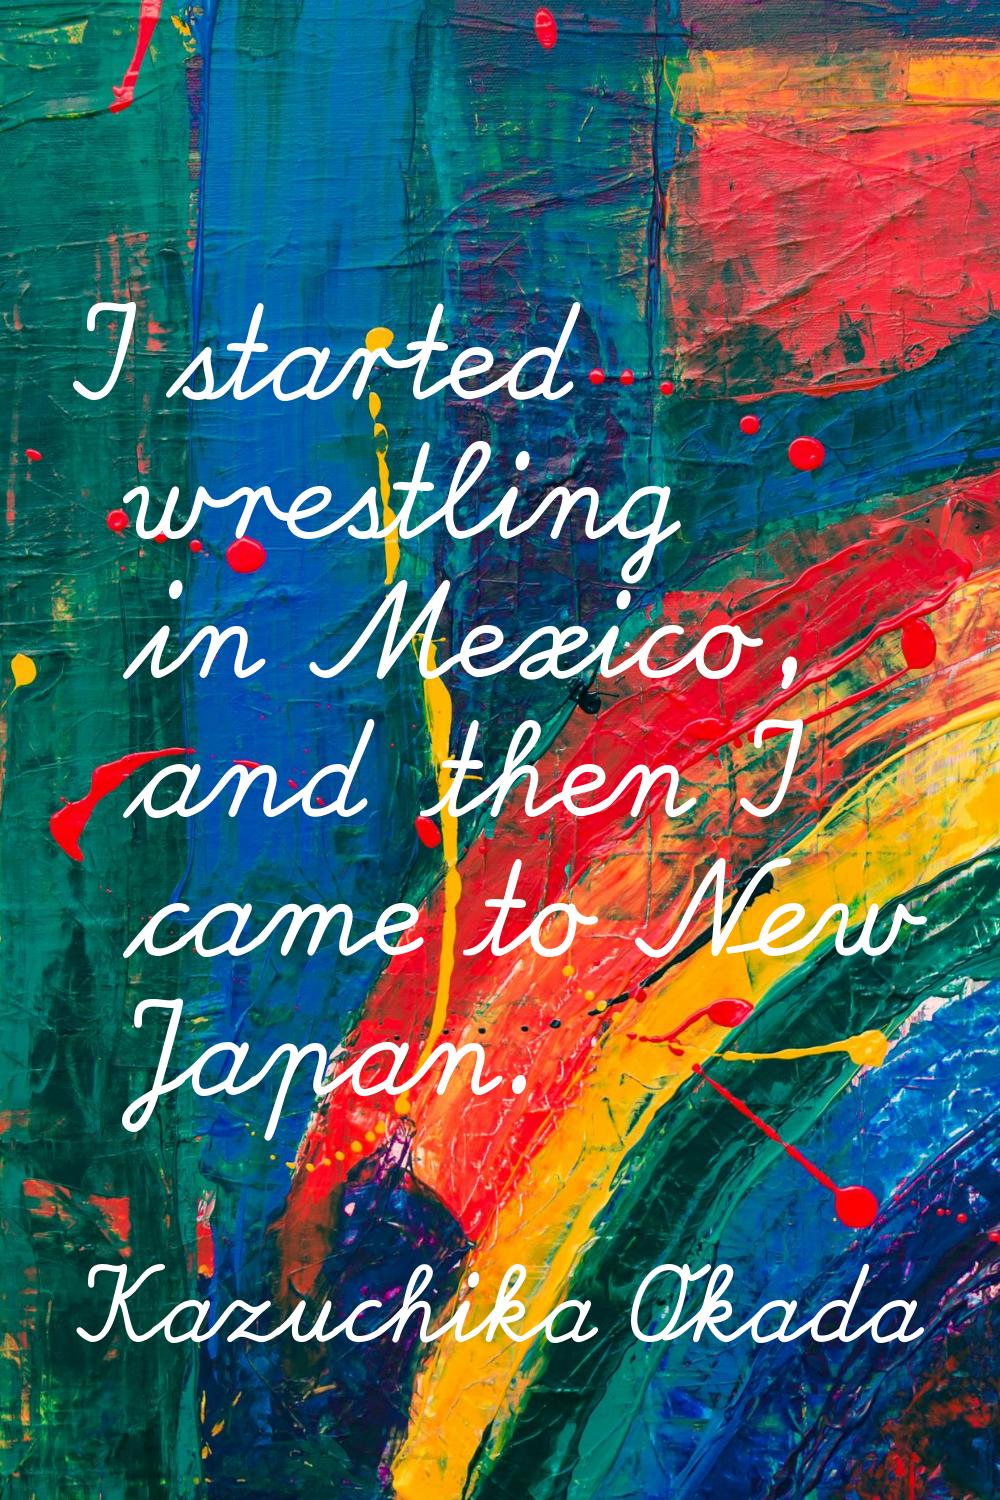 I started wrestling in Mexico, and then I came to New Japan.